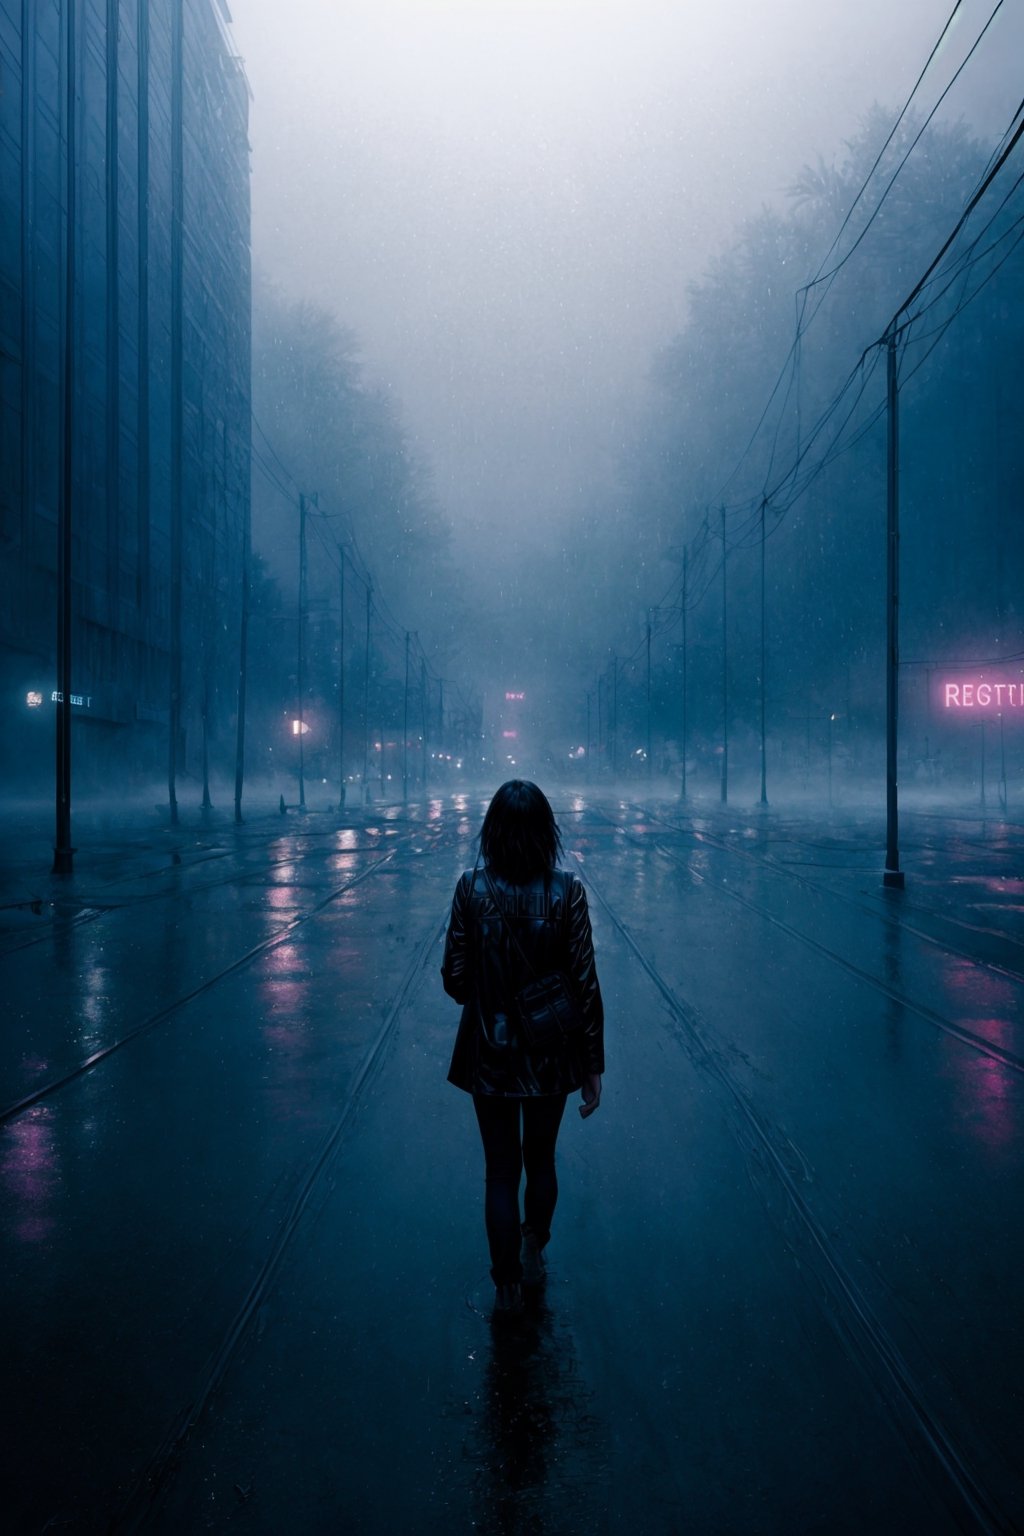 Beautiful girl walking amidst thick fog in the city    Estilo Hiperrealista / Hyperrealistic style    Refik Anadol 
ground with puddles

